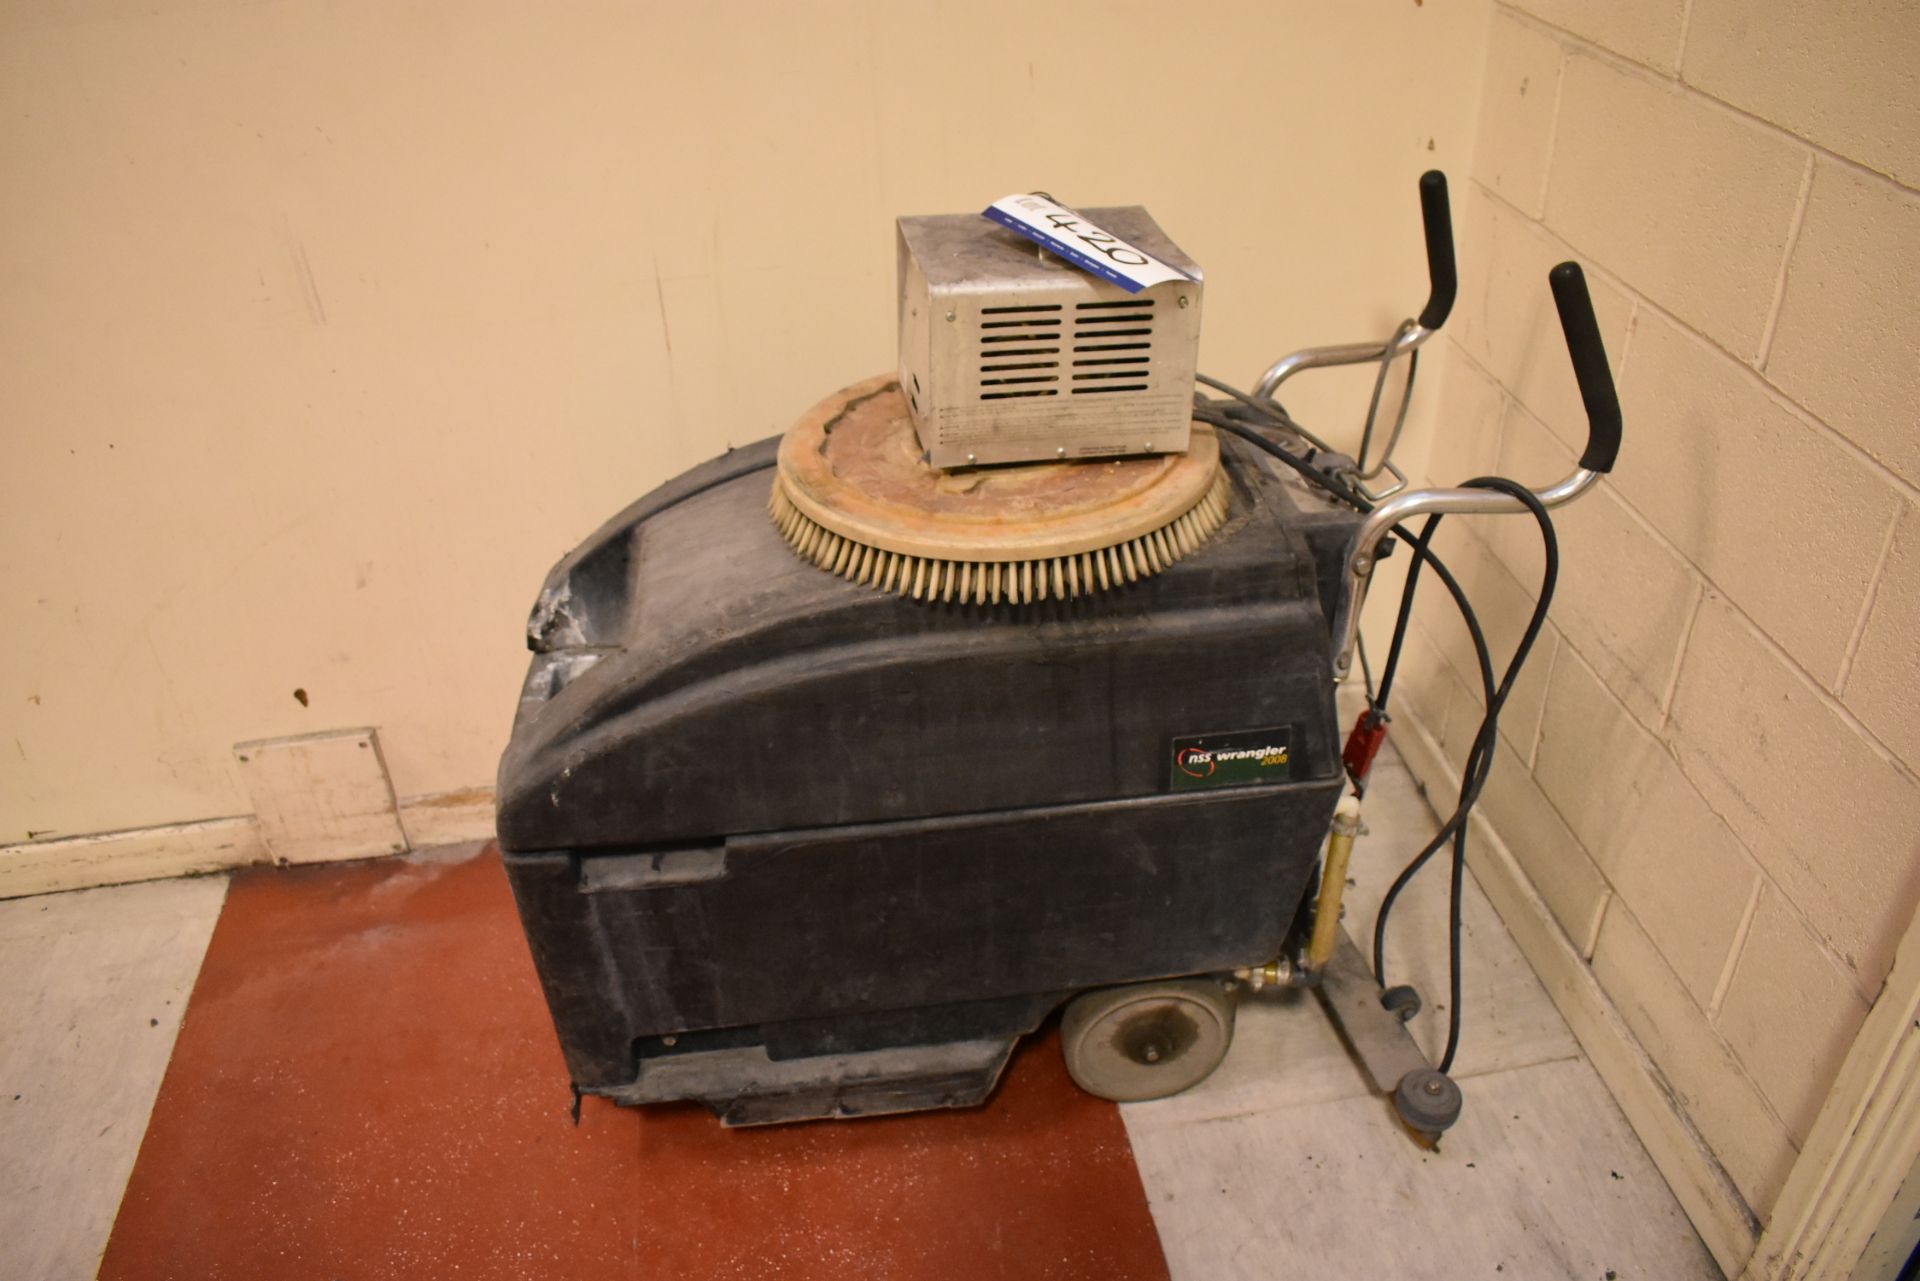 NSS Wrangler 2008 Electric Floor Cleaner with Lesstronic 2, 24v Charger